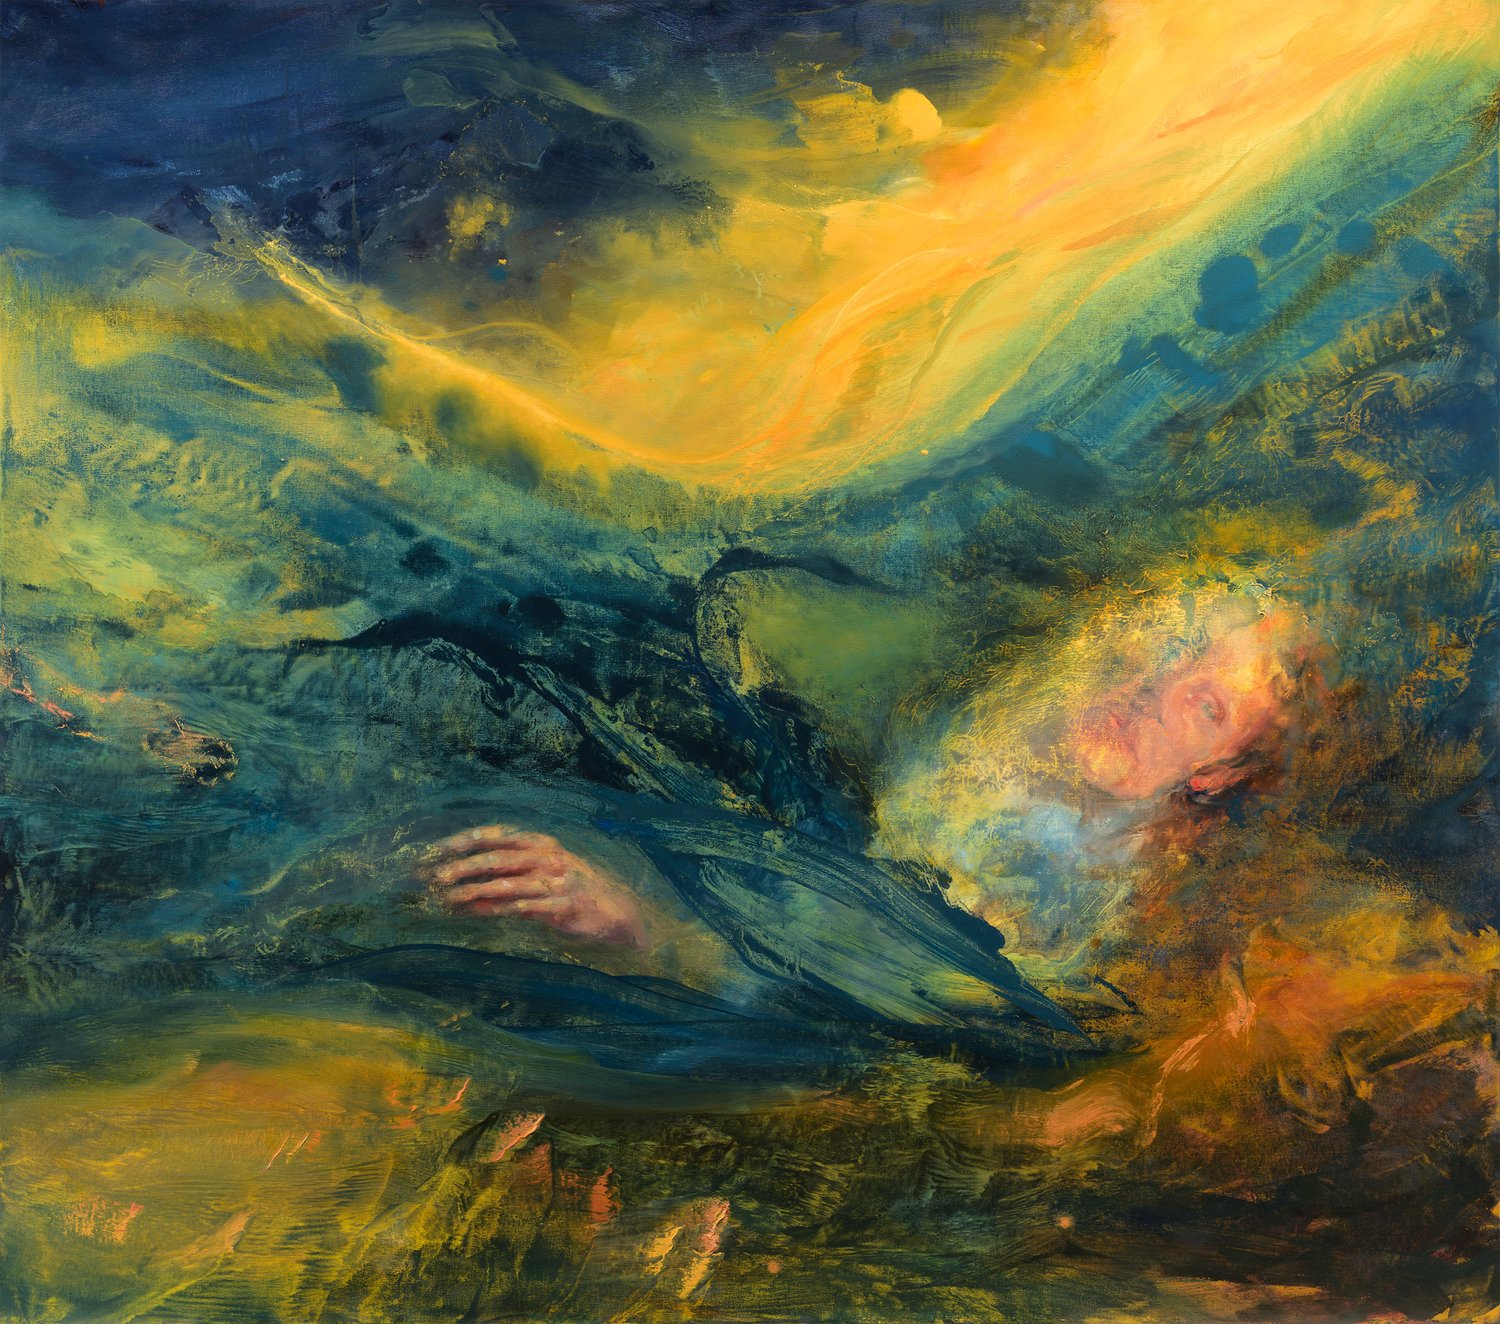 Samantha Keely Smith LAY ME DOWN